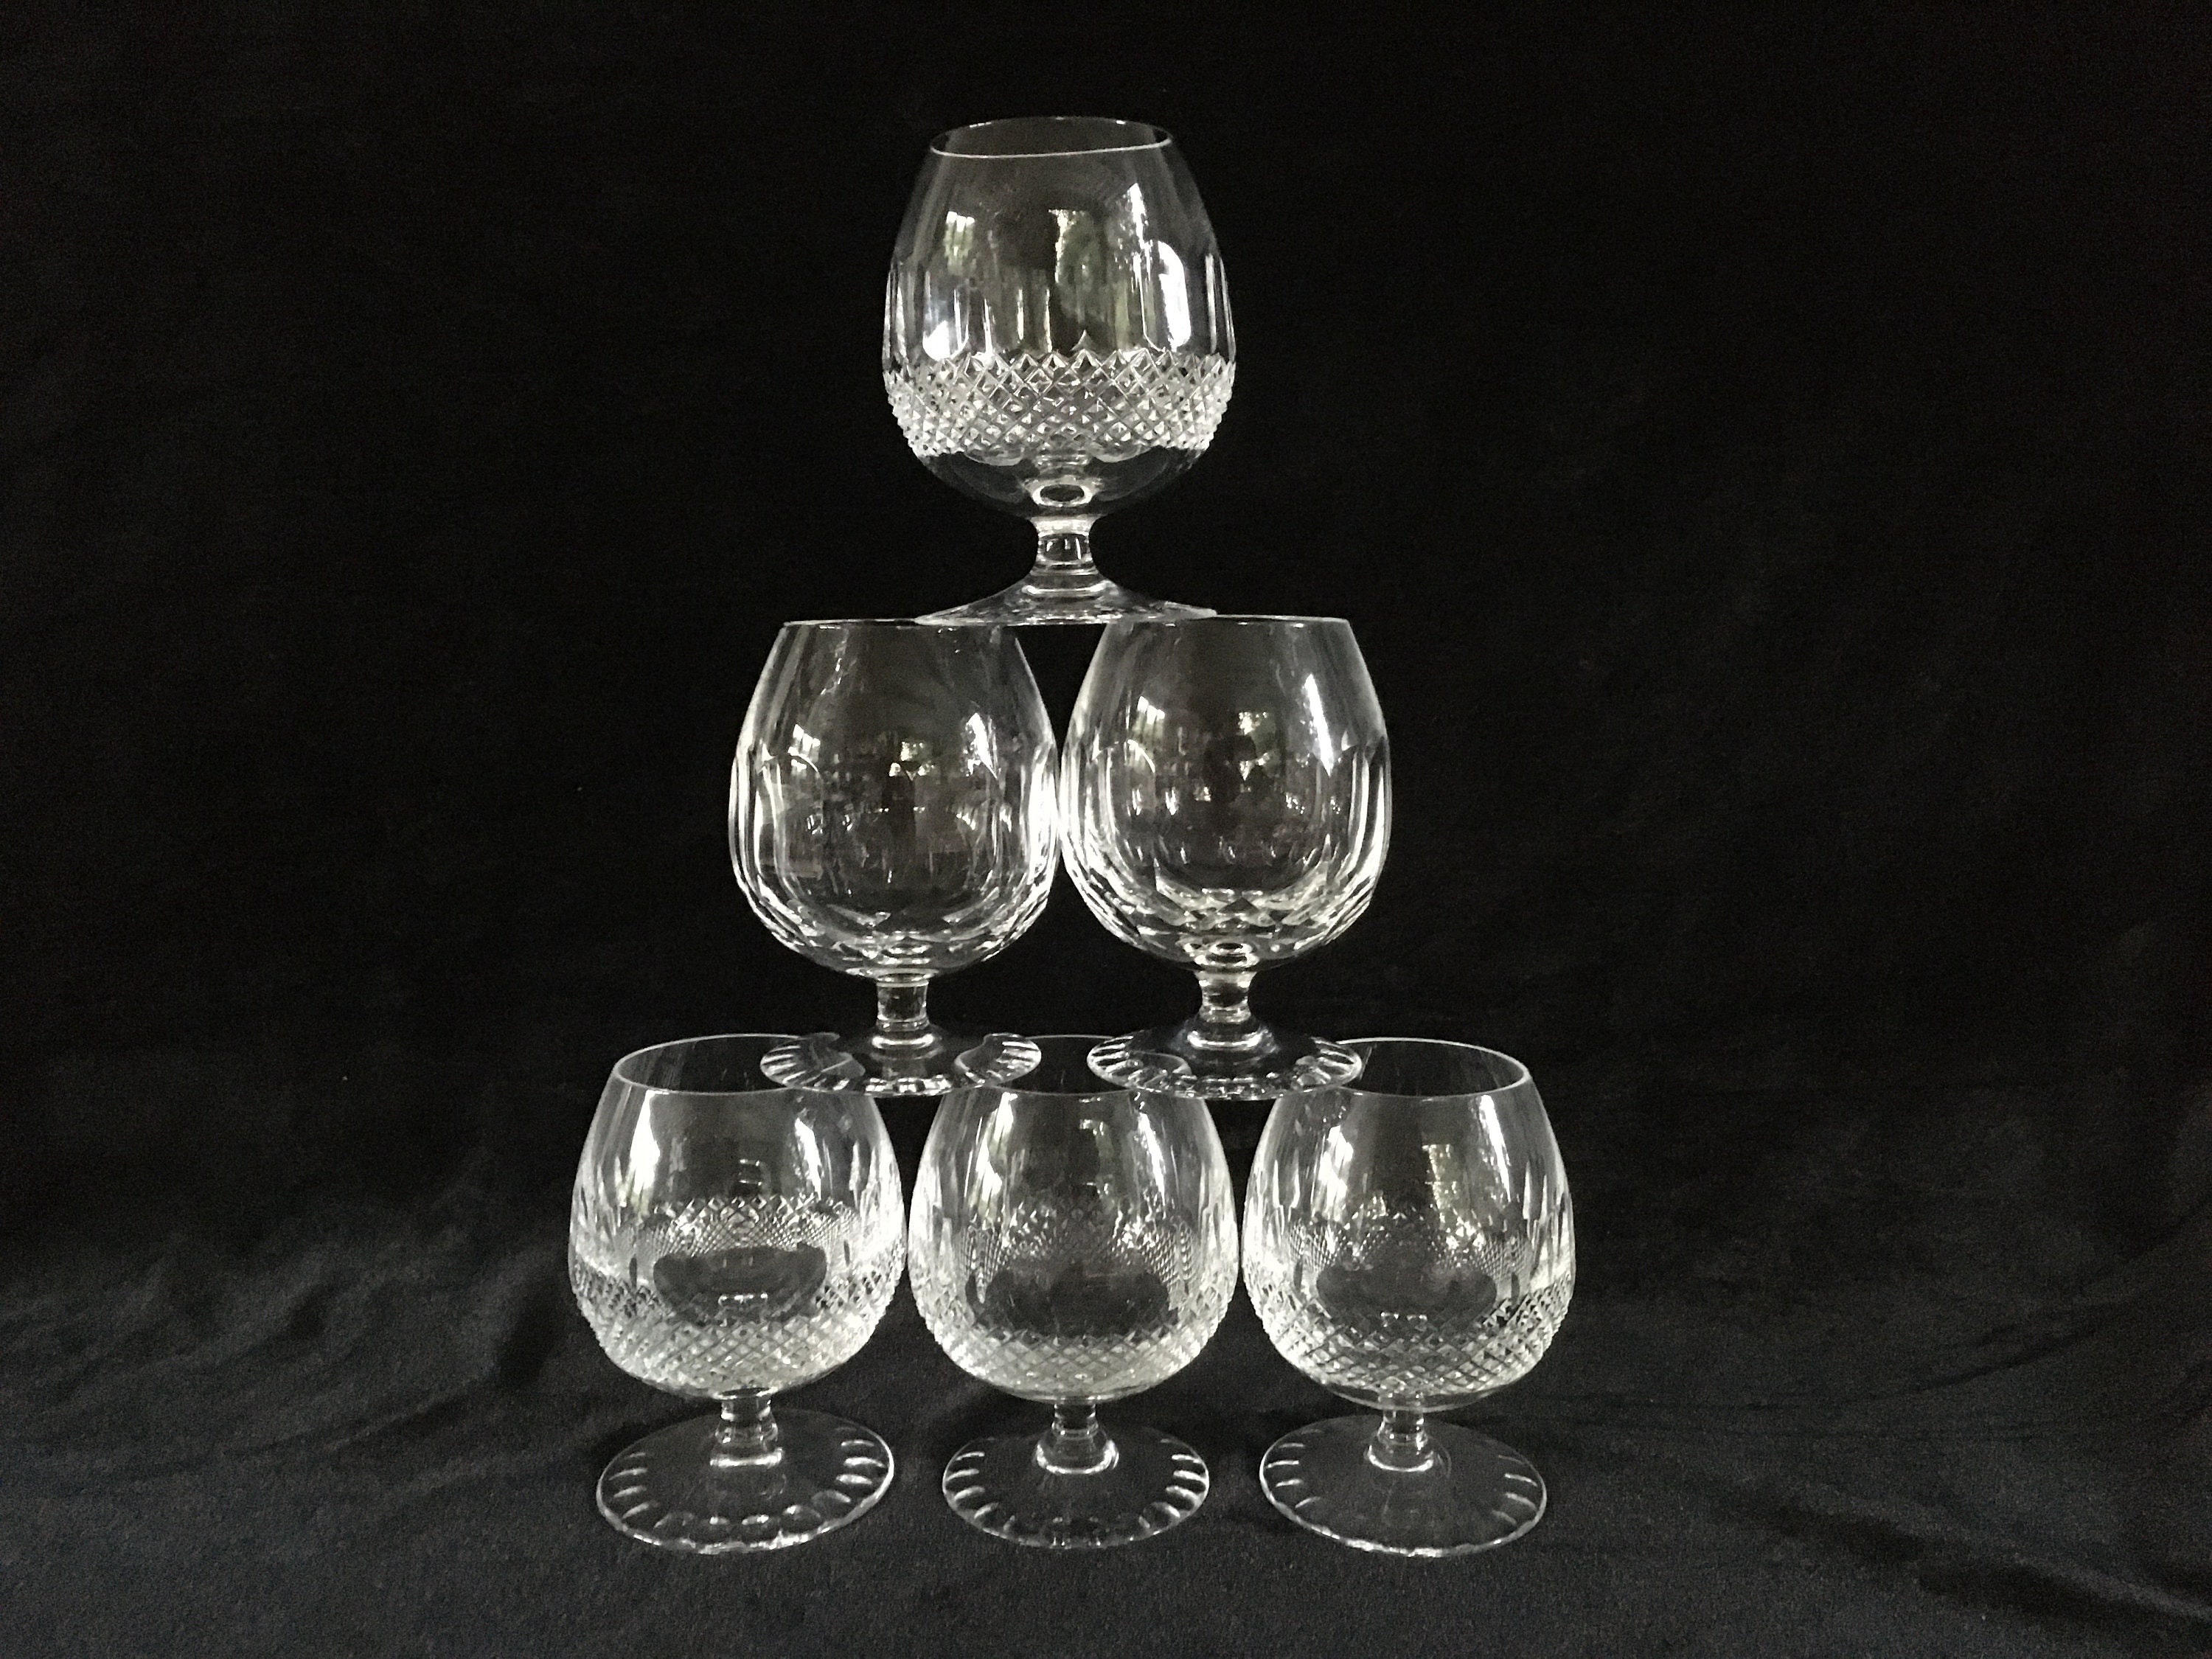 GLASSIQUE CADEAU Cognac, Brandy, Tequila and Dessert Wine Snifter Glasses |  Set of 4 Small Tasting T…See more GLASSIQUE CADEAU Cognac, Brandy, Tequila